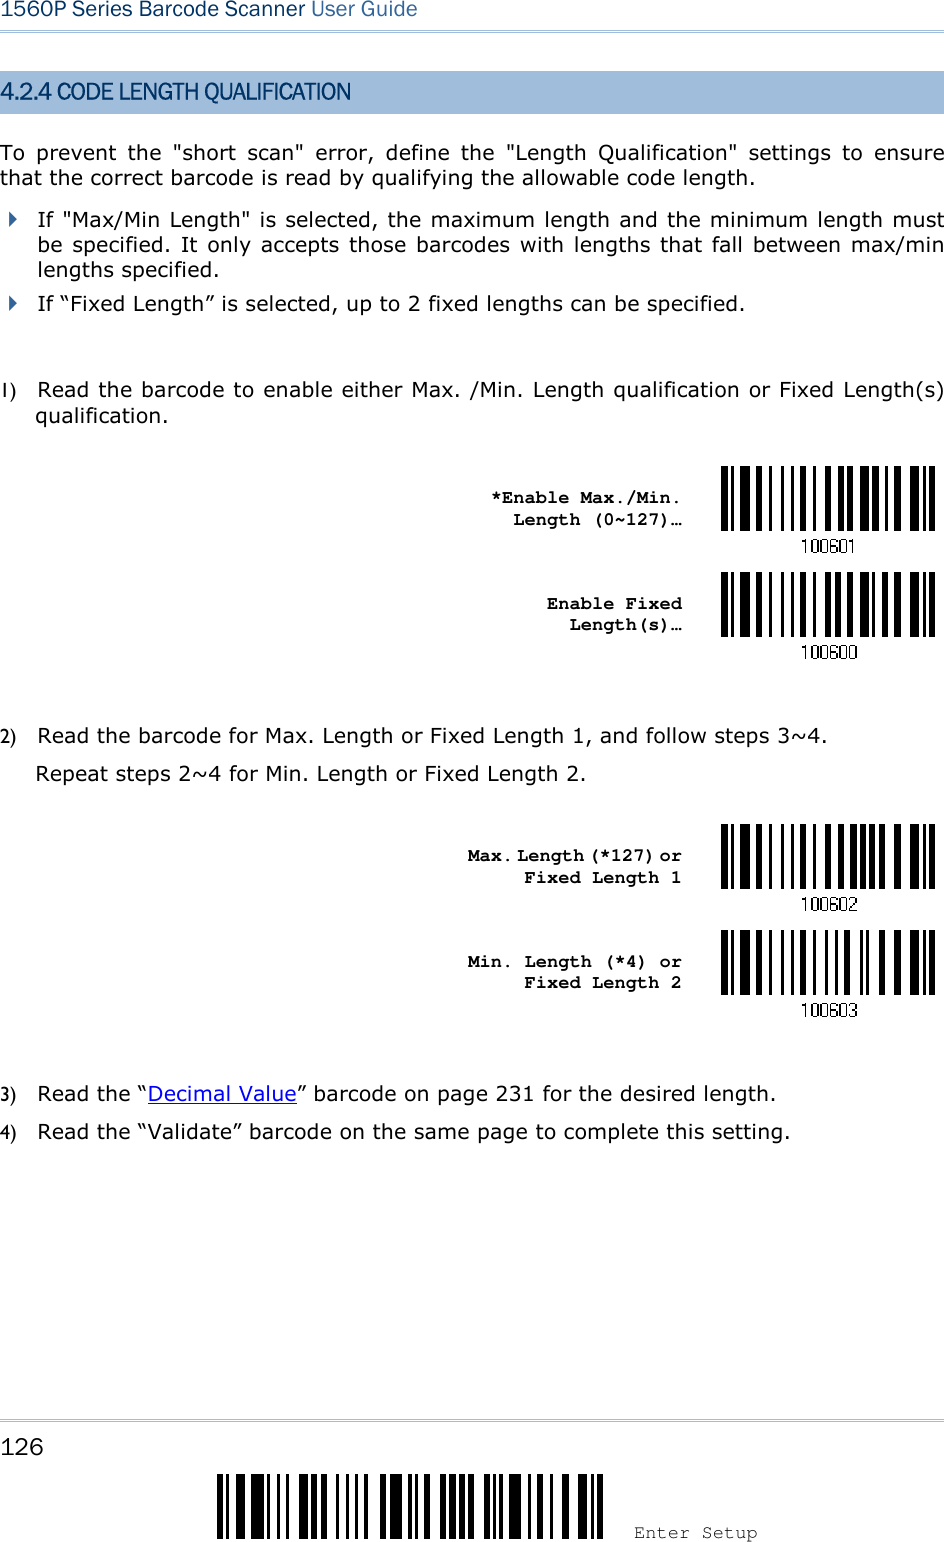 126 Enter Setup 1560P Series Barcode Scanner User Guide 4.2.4 CODE LENGTH QUALIFICATION To  prevent  the  &quot;short  scan&quot;  error,  define  the  &quot;Length  Qualification&quot;  settings  to  ensure that the correct barcode is read by qualifying the allowable code length. If &quot;Max/Min Length&quot; is selected, the maximum length and the minimum length mustbe specified. It only accepts those barcodes with lengths that fall between max/minlengths specified.If “Fixed Length” is selected, up to 2 fixed lengths can be specified.1) Read the barcode to enable either Max. /Min. Length qualification or Fixed Length(s)qualification.*Enable Max./Min.Length (0~127)… Enable Fixed Length(s)… 2) Read the barcode for Max. Length or Fixed Length 1, and follow steps 3~4.Repeat steps 2~4 for Min. Length or Fixed Length 2.Max. Length (*127) or Fixed Length 1 Min. Length (*4) or Fixed Length 2 3) Read the “Decimal Value” barcode on page 231 for the desired length.4) Read the “Validate” barcode on the same page to complete this setting.